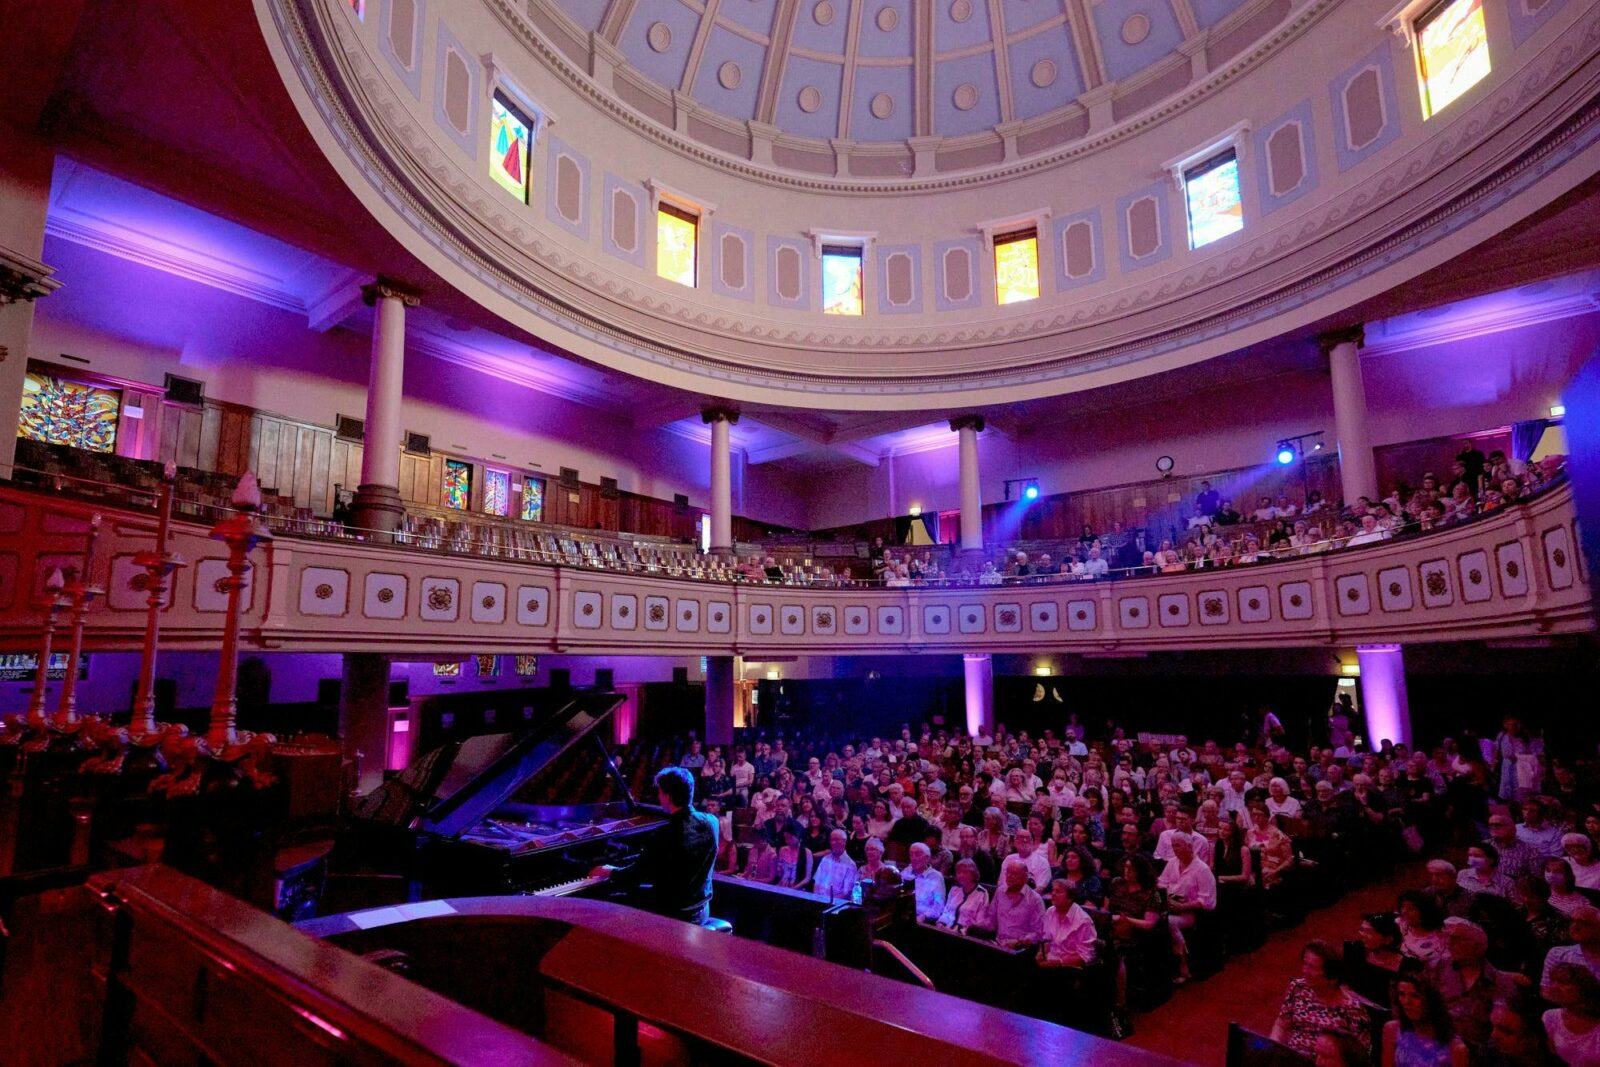 toorak synagogue, man at a piano, a dome with stained glass windows, people sitting in the audience